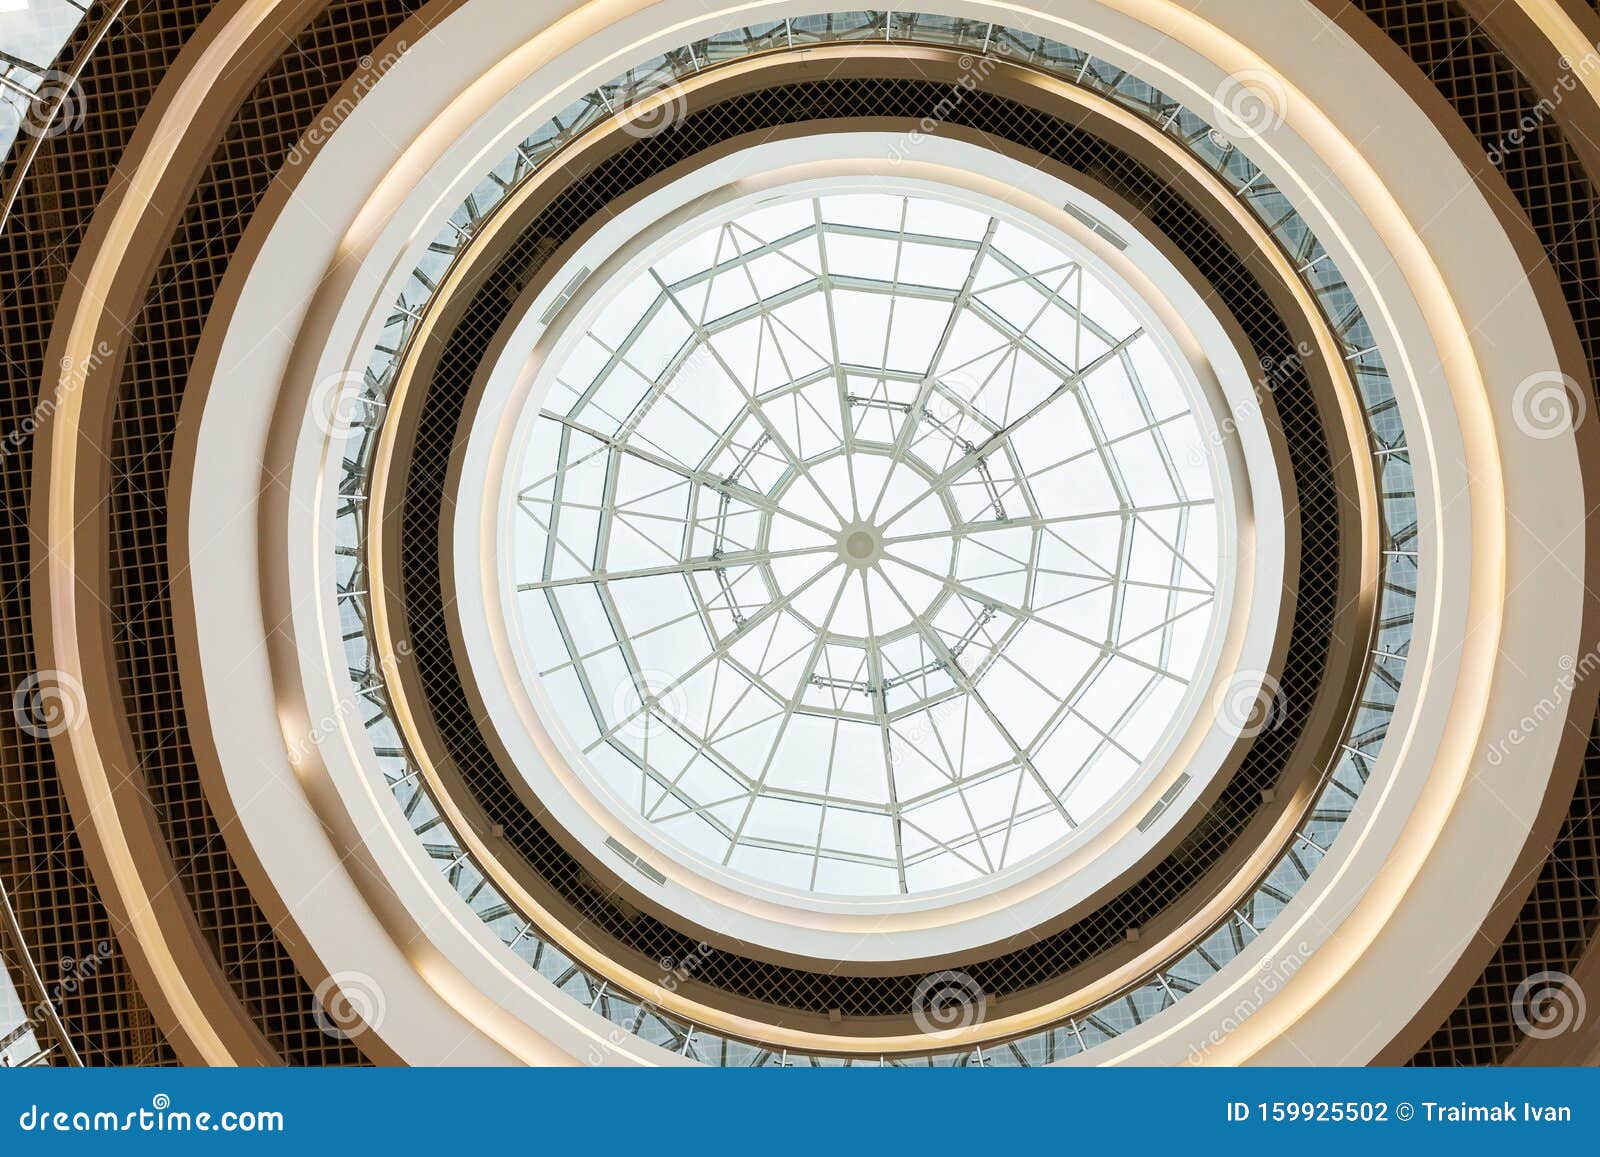 Round Glass Ceiling Dome Modern Architecture Design Inside